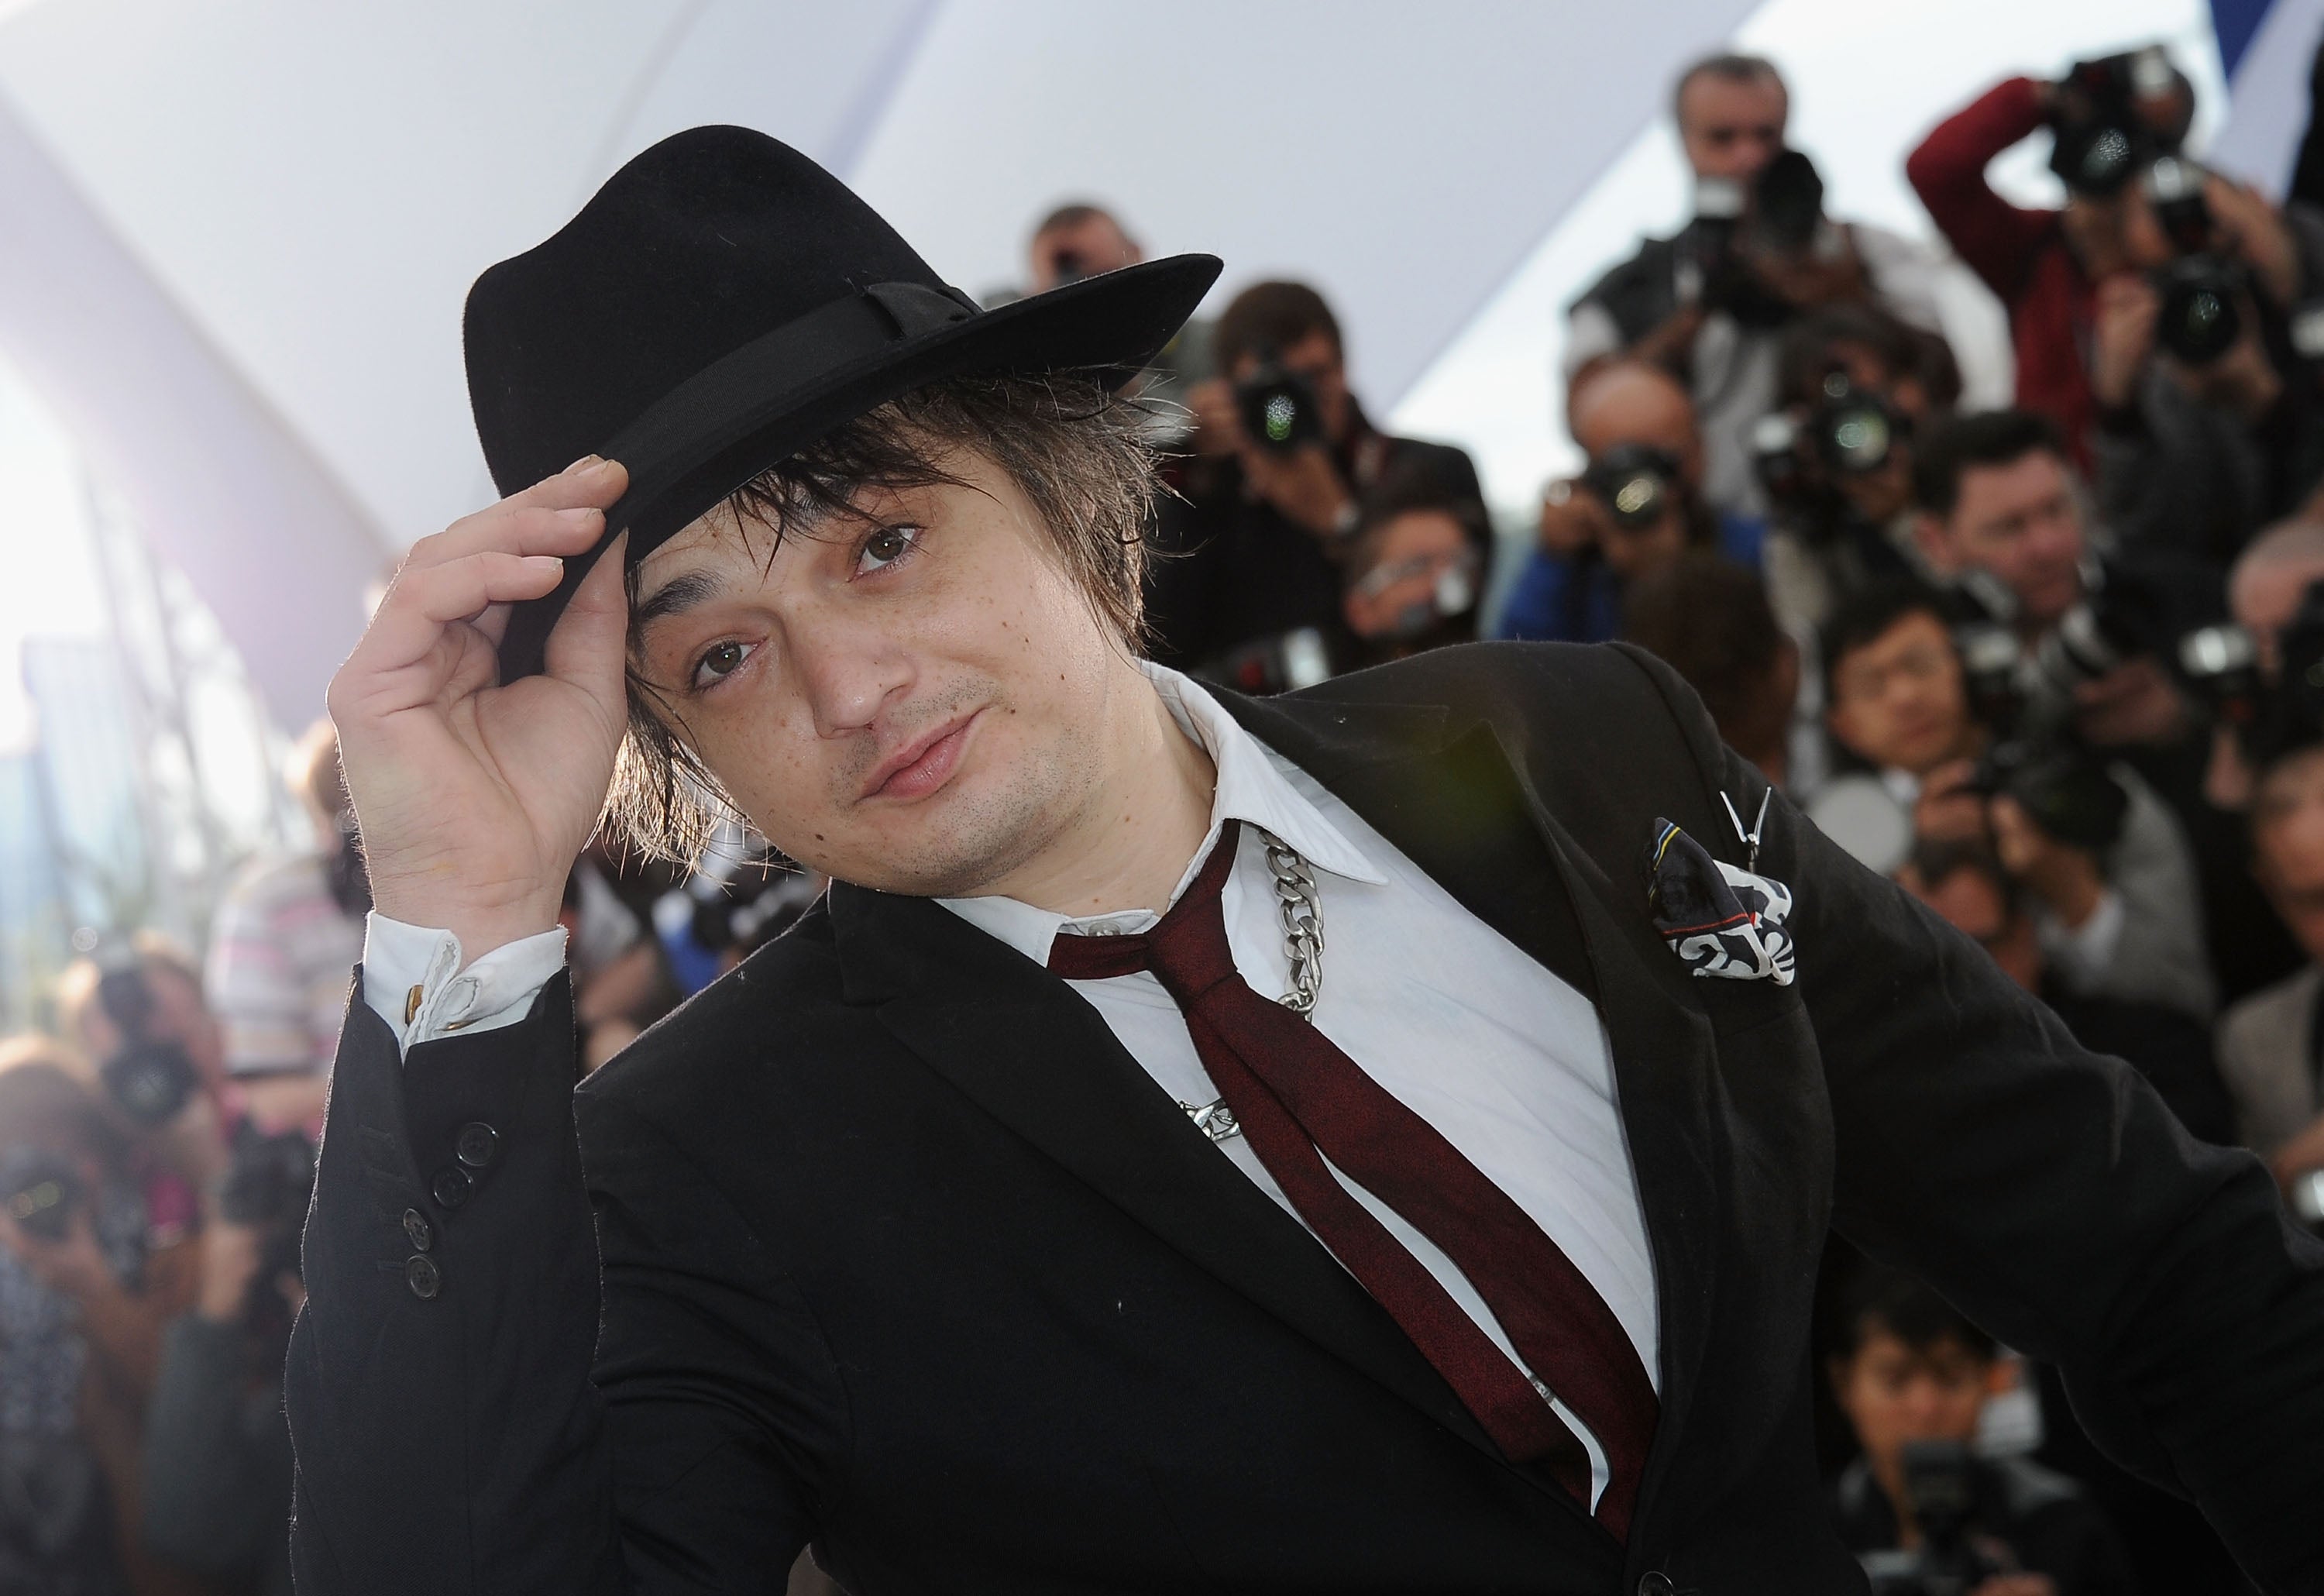 Pete Doherty in 2012